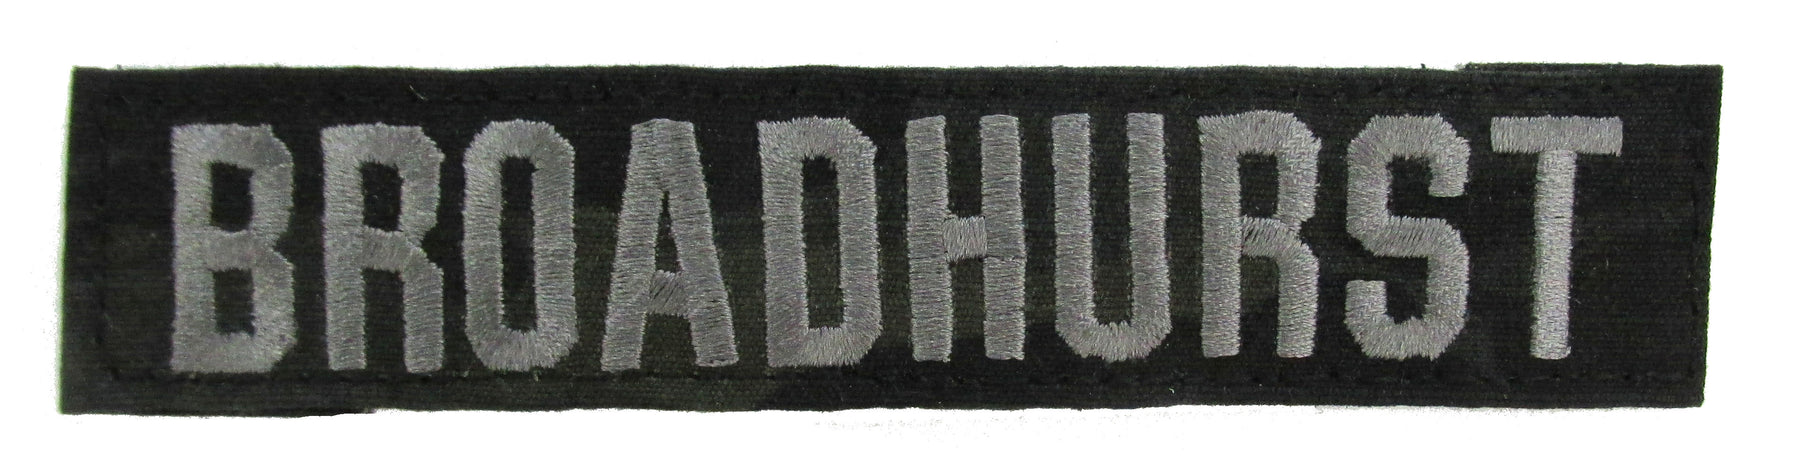 Multicam Black Name Tape with Hook Fastener - Fabric Material